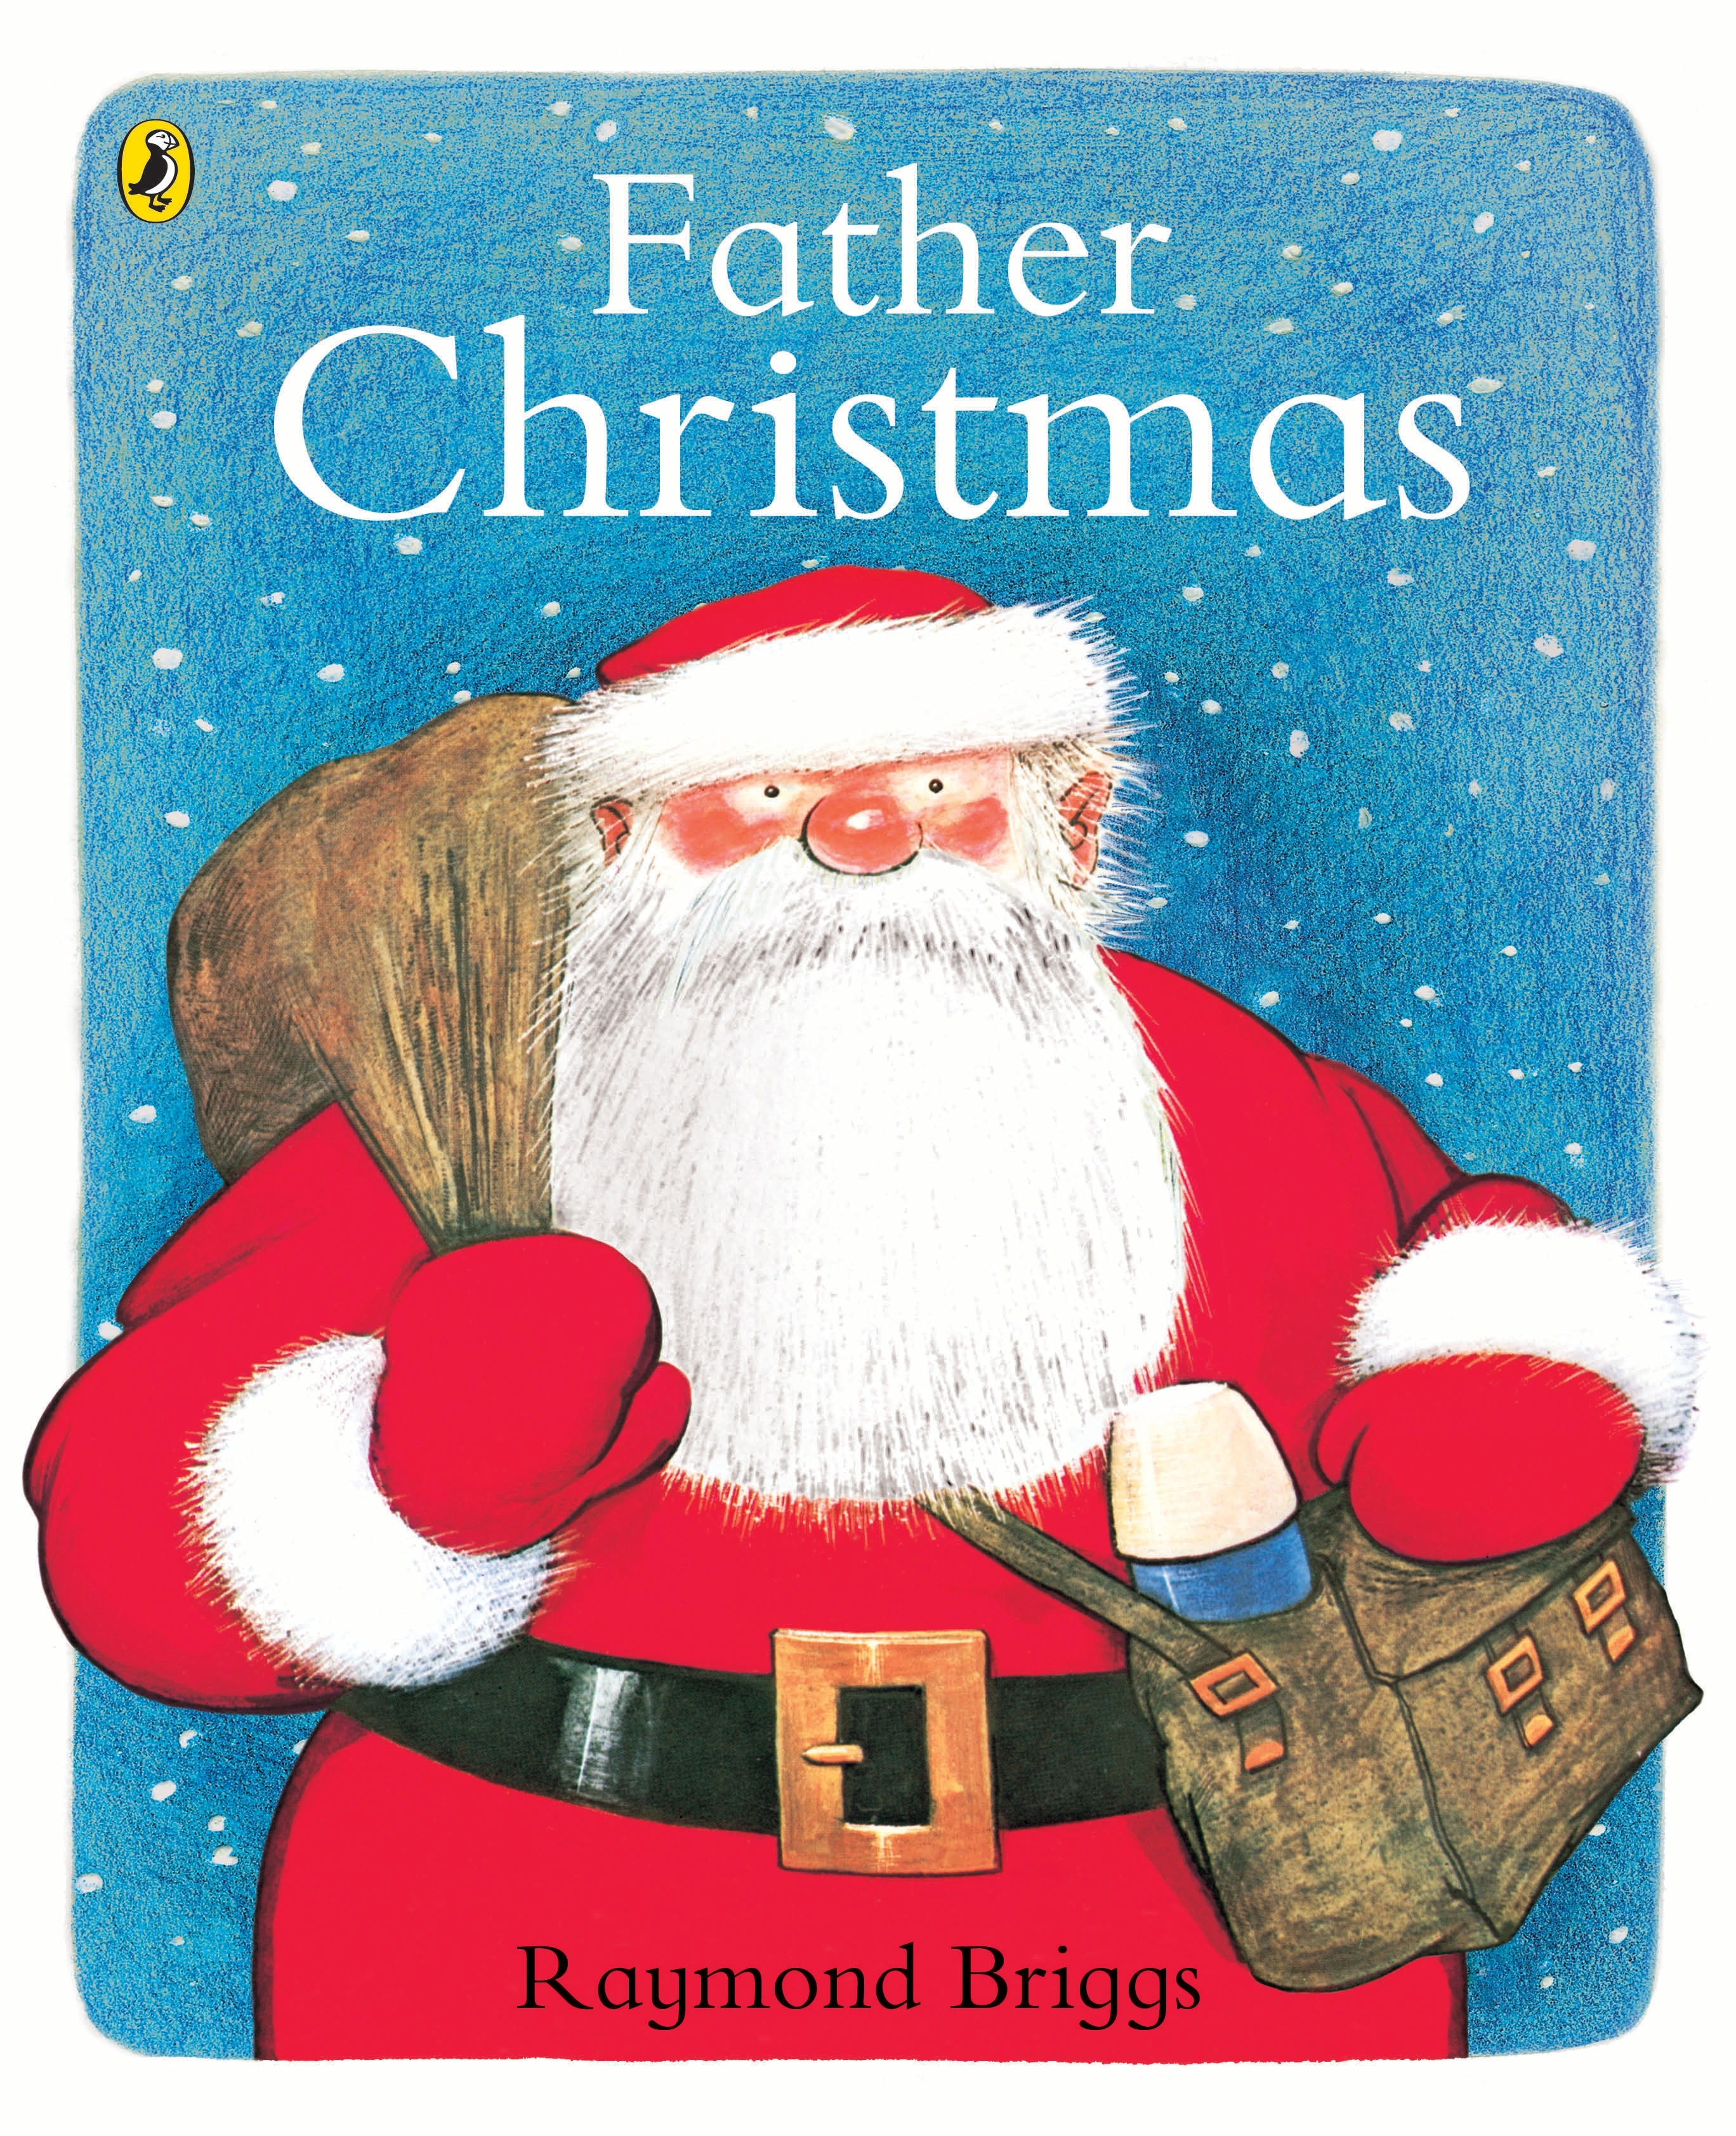 Book “Father Christmas” by Raymond Briggs — September 5, 2013